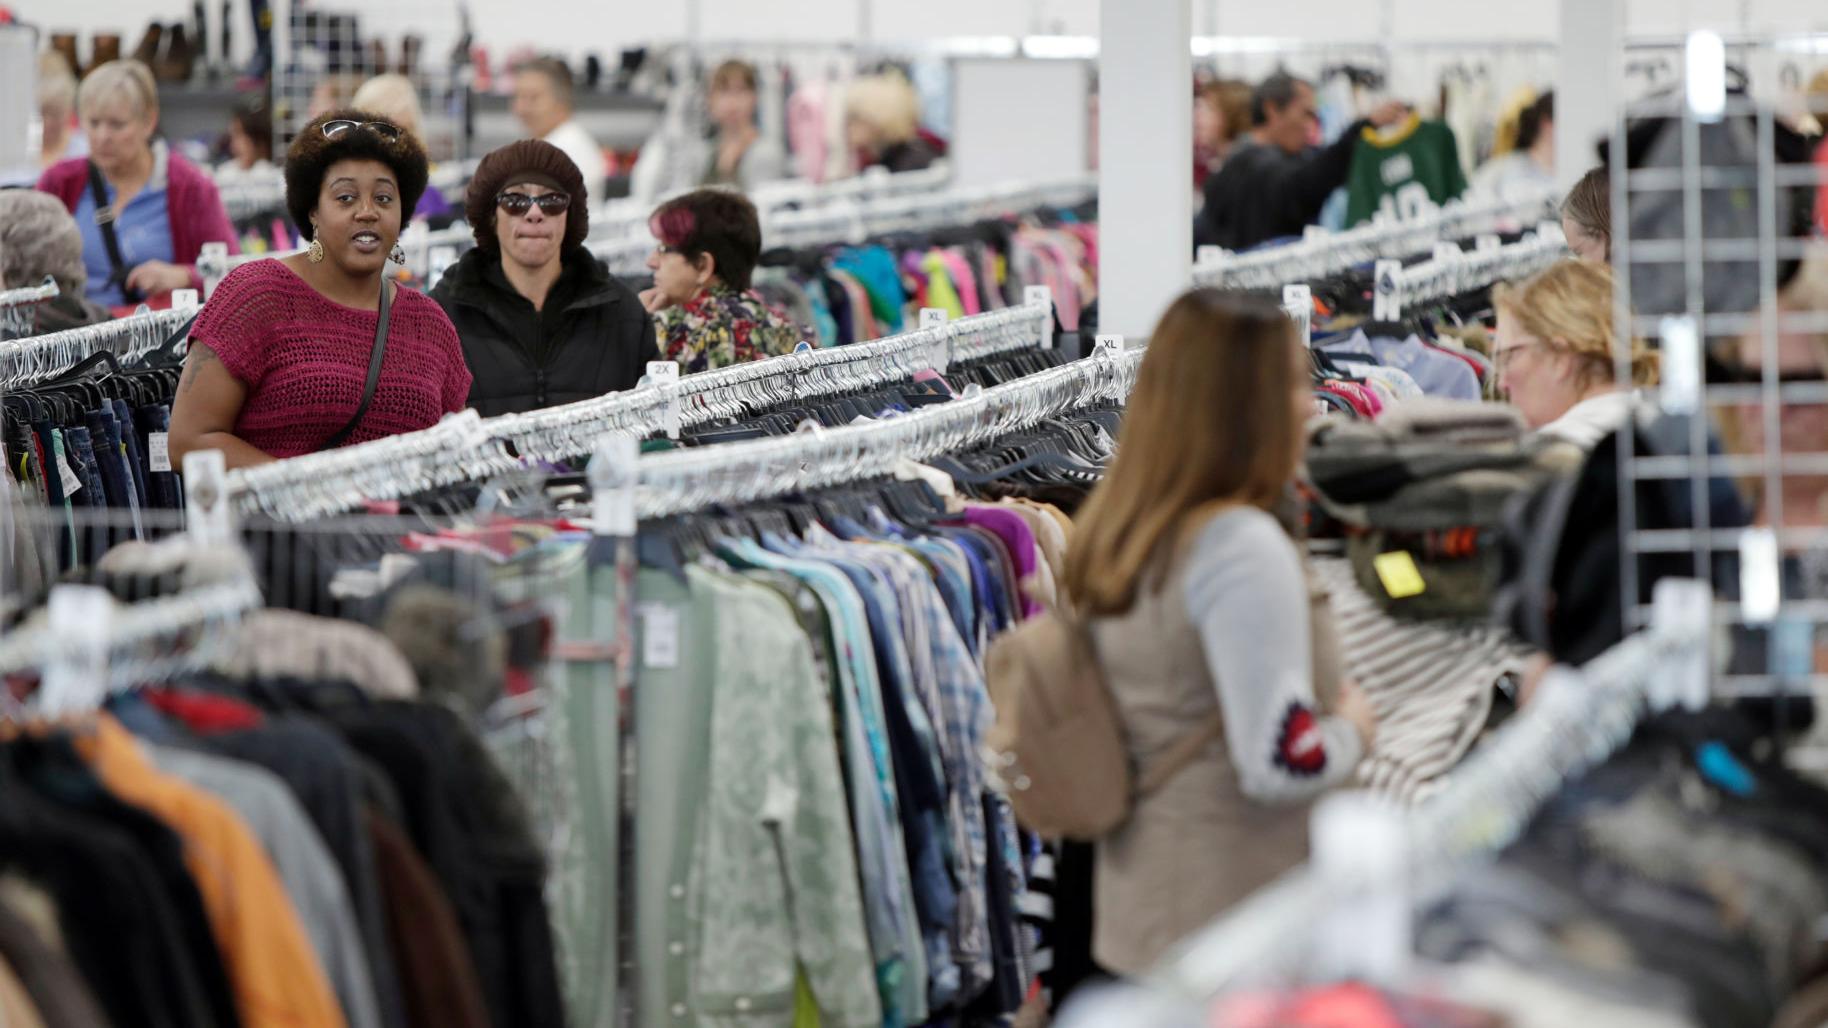 Goodwill Reinvigorates Its Brand A Shopping Center And The North Side Business News Madisoncom